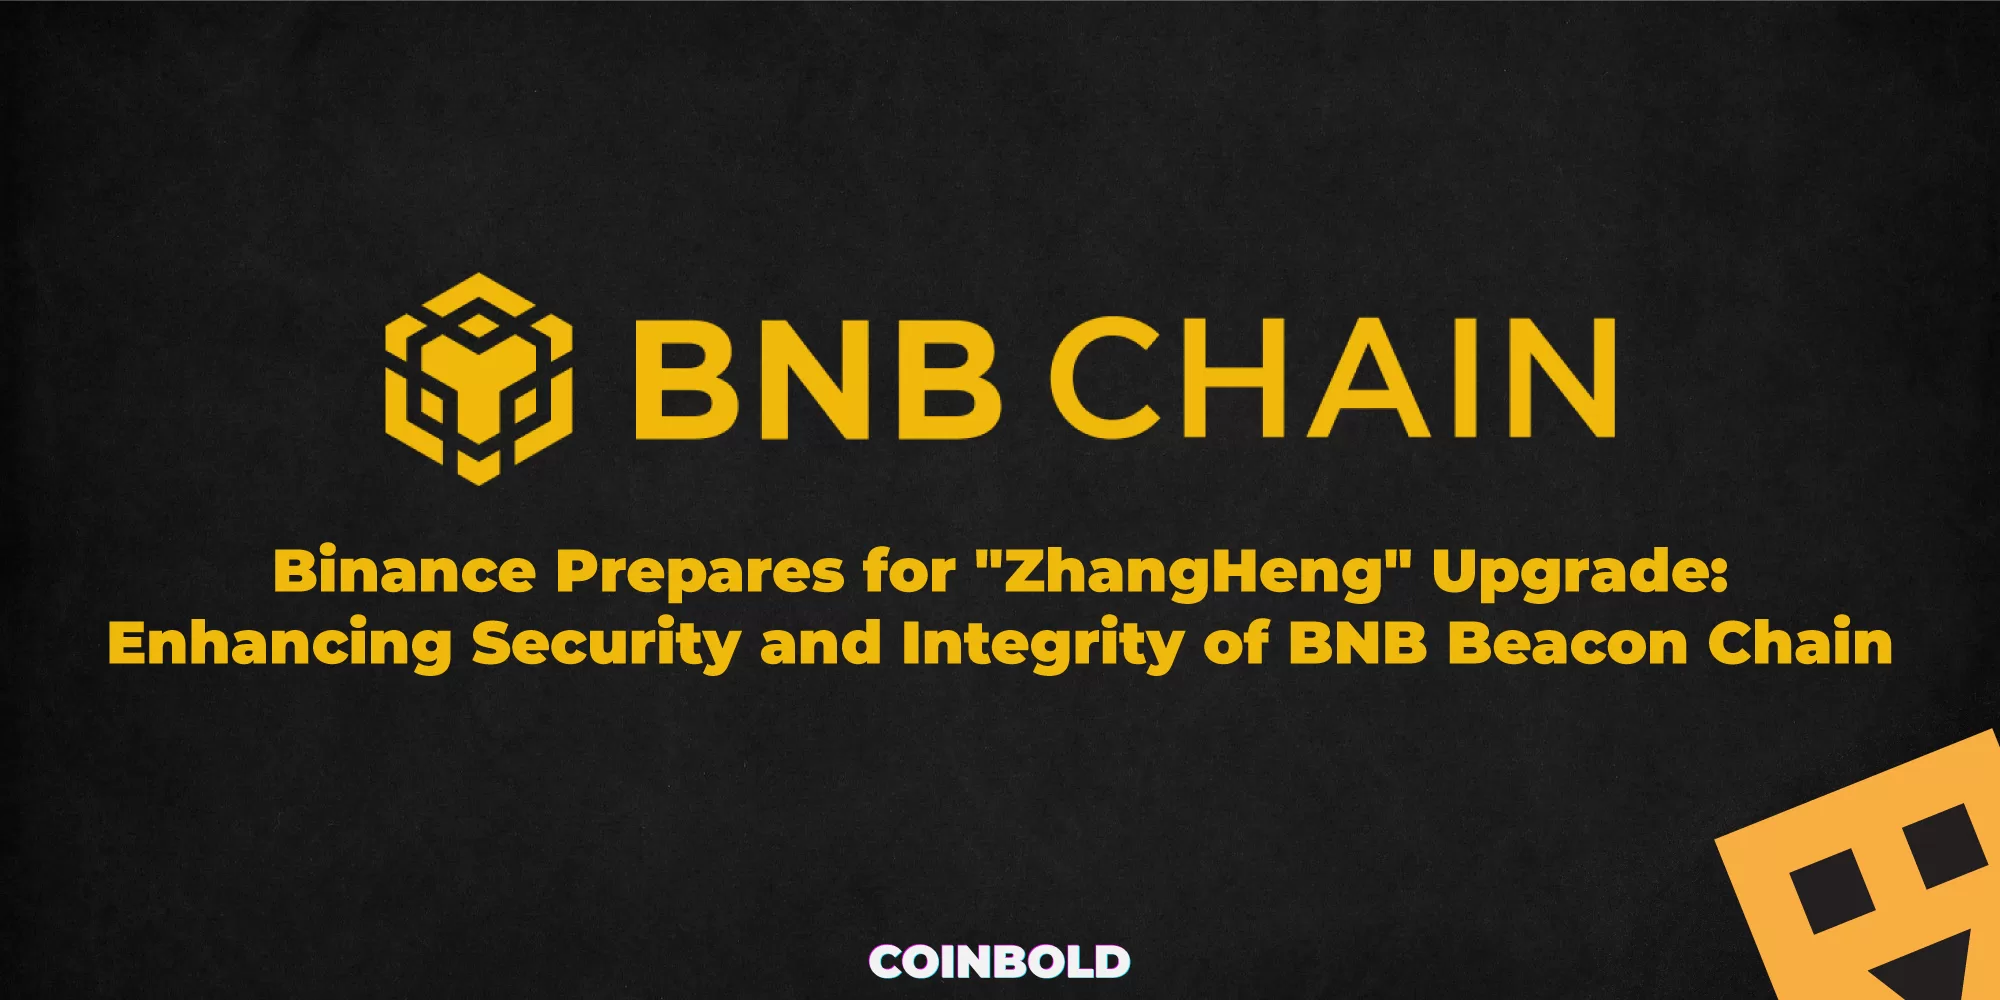 Binance Prepares for "ZhangHeng" Upgrade: Enhancing Security and Integrity of BNB Beacon Chain